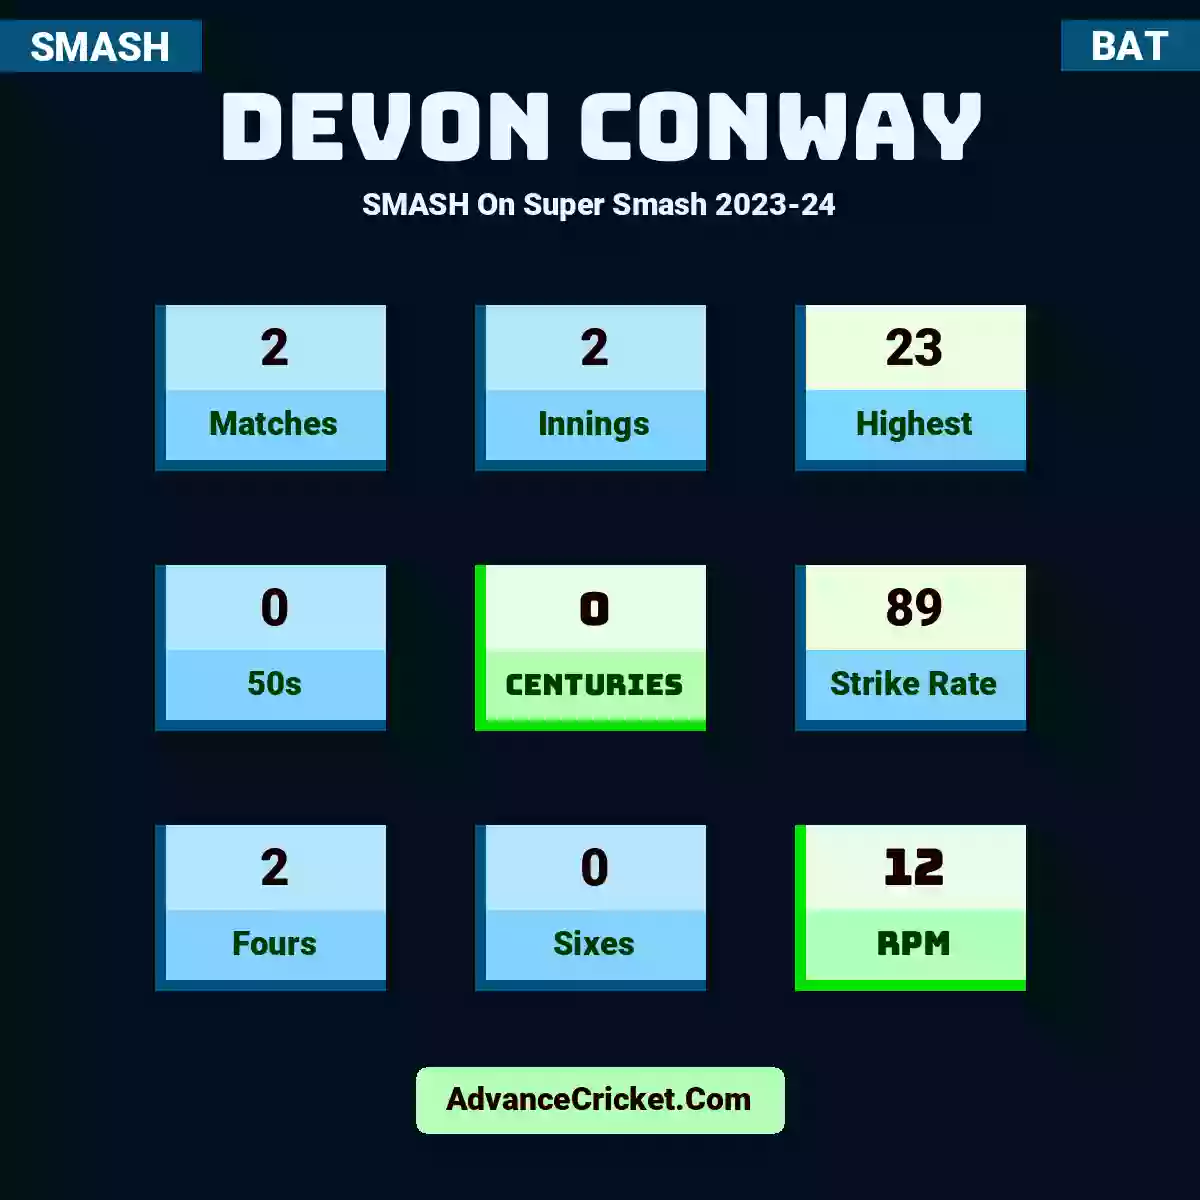 Devon Conway SMASH  On Super Smash 2023-24, Devon Conway played 2 matches, scored 23 runs as highest, 0 half-centuries, and 0 centuries, with a strike rate of 89. D.Conway hit 2 fours and 0 sixes, with an RPM of 12.